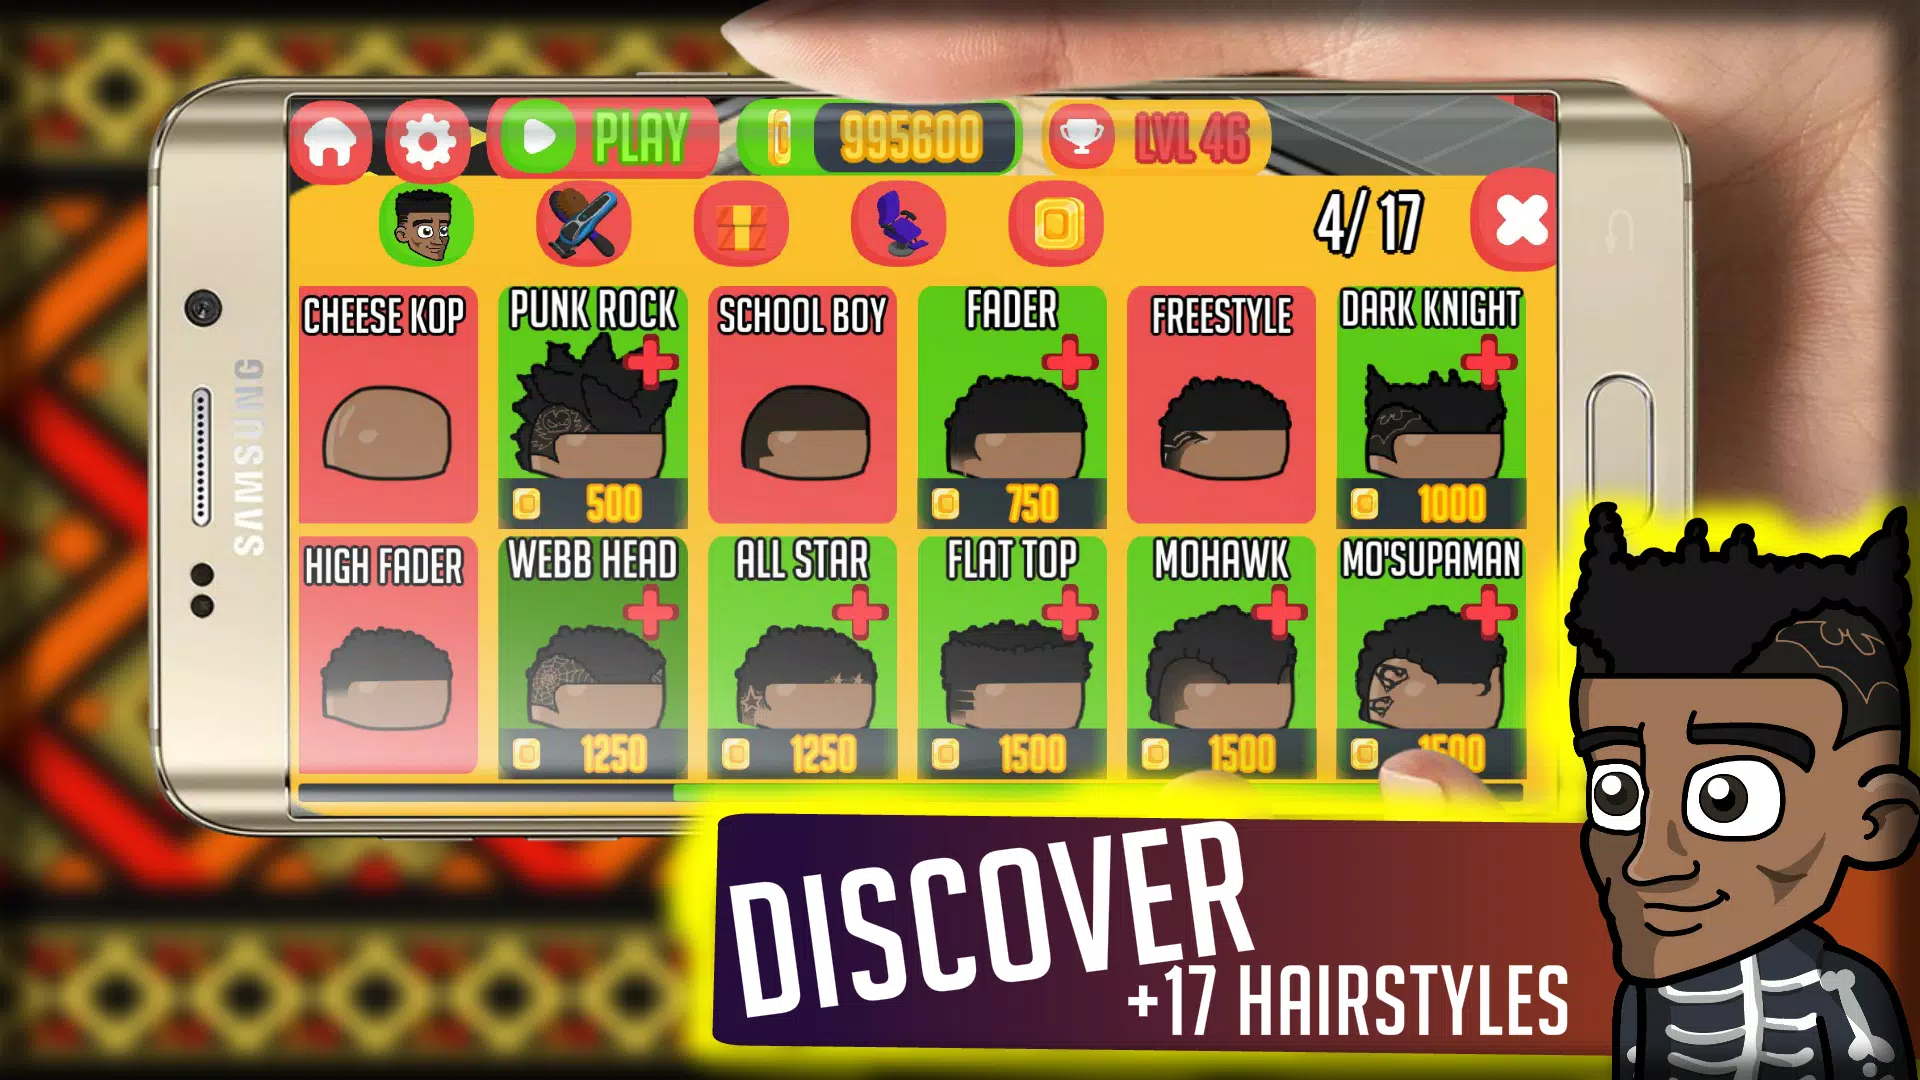 Idle Barber Shop Tycoon - Game, android gameplay, game review